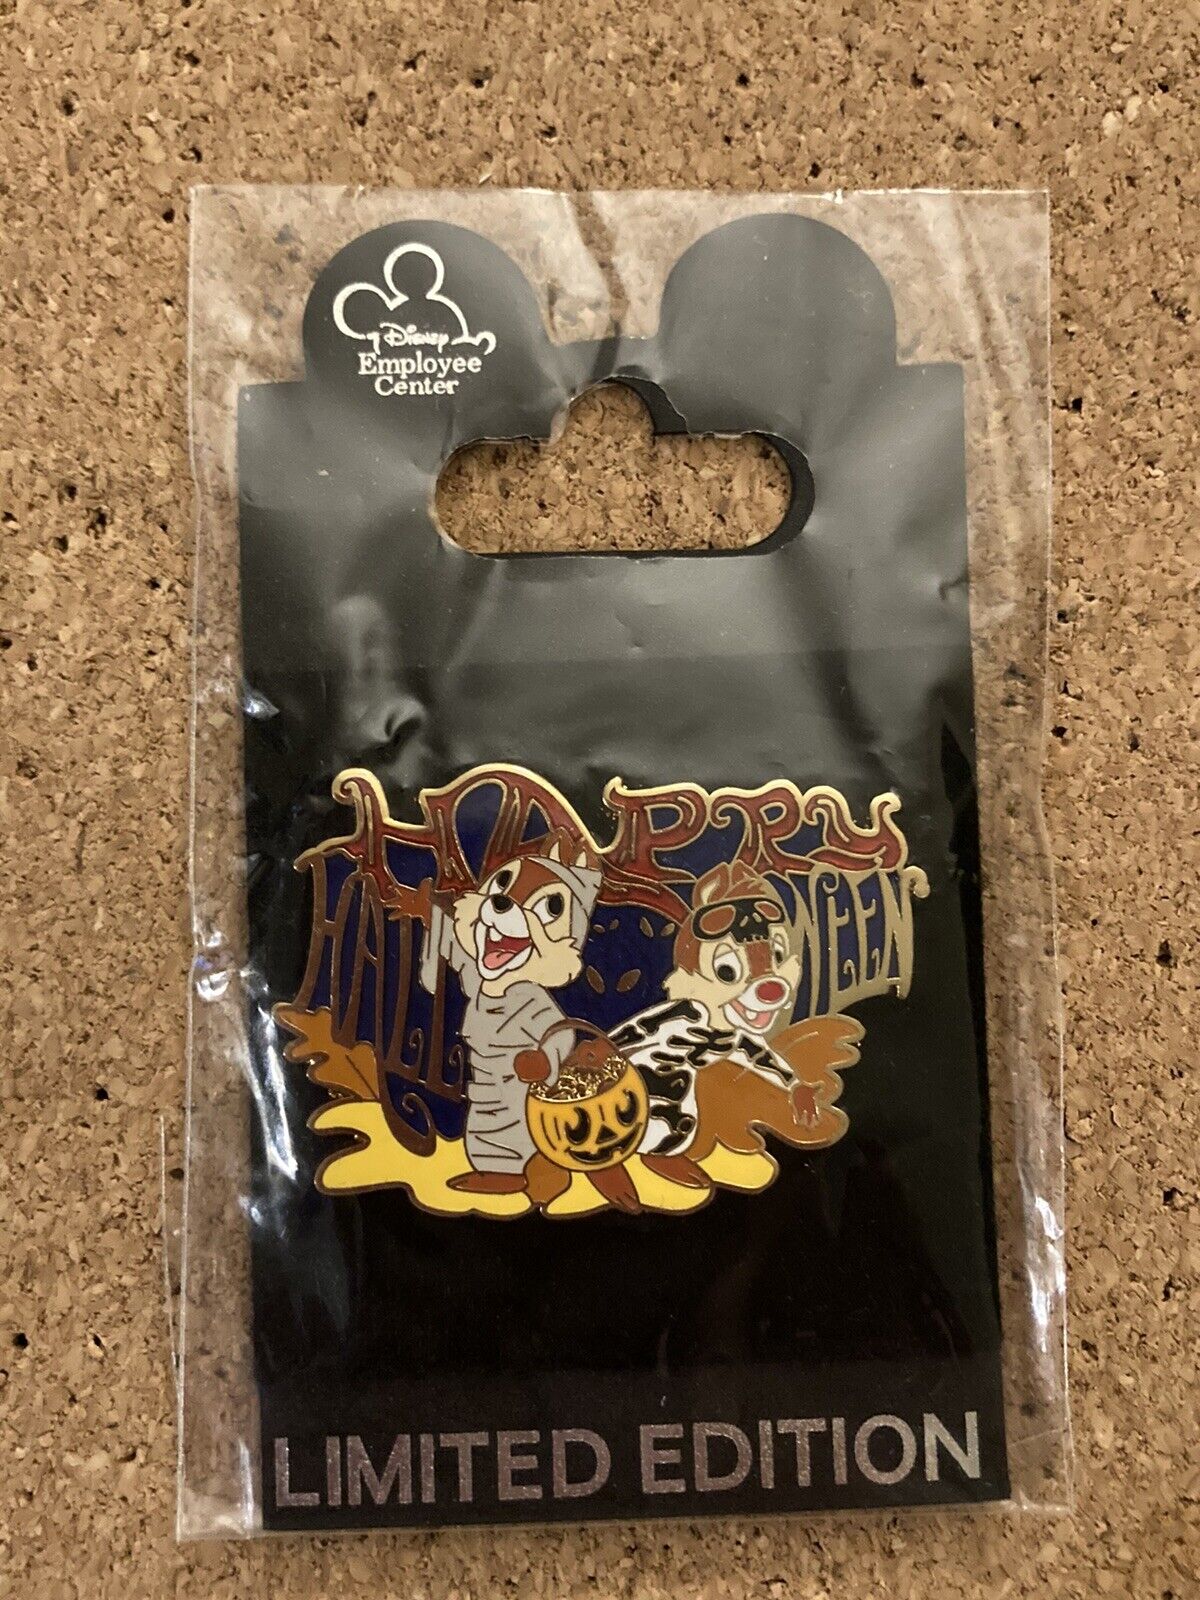 DEC Disney Employee Center Chip and Dale Happy Halloween 2010 LE 150 Cast Pin